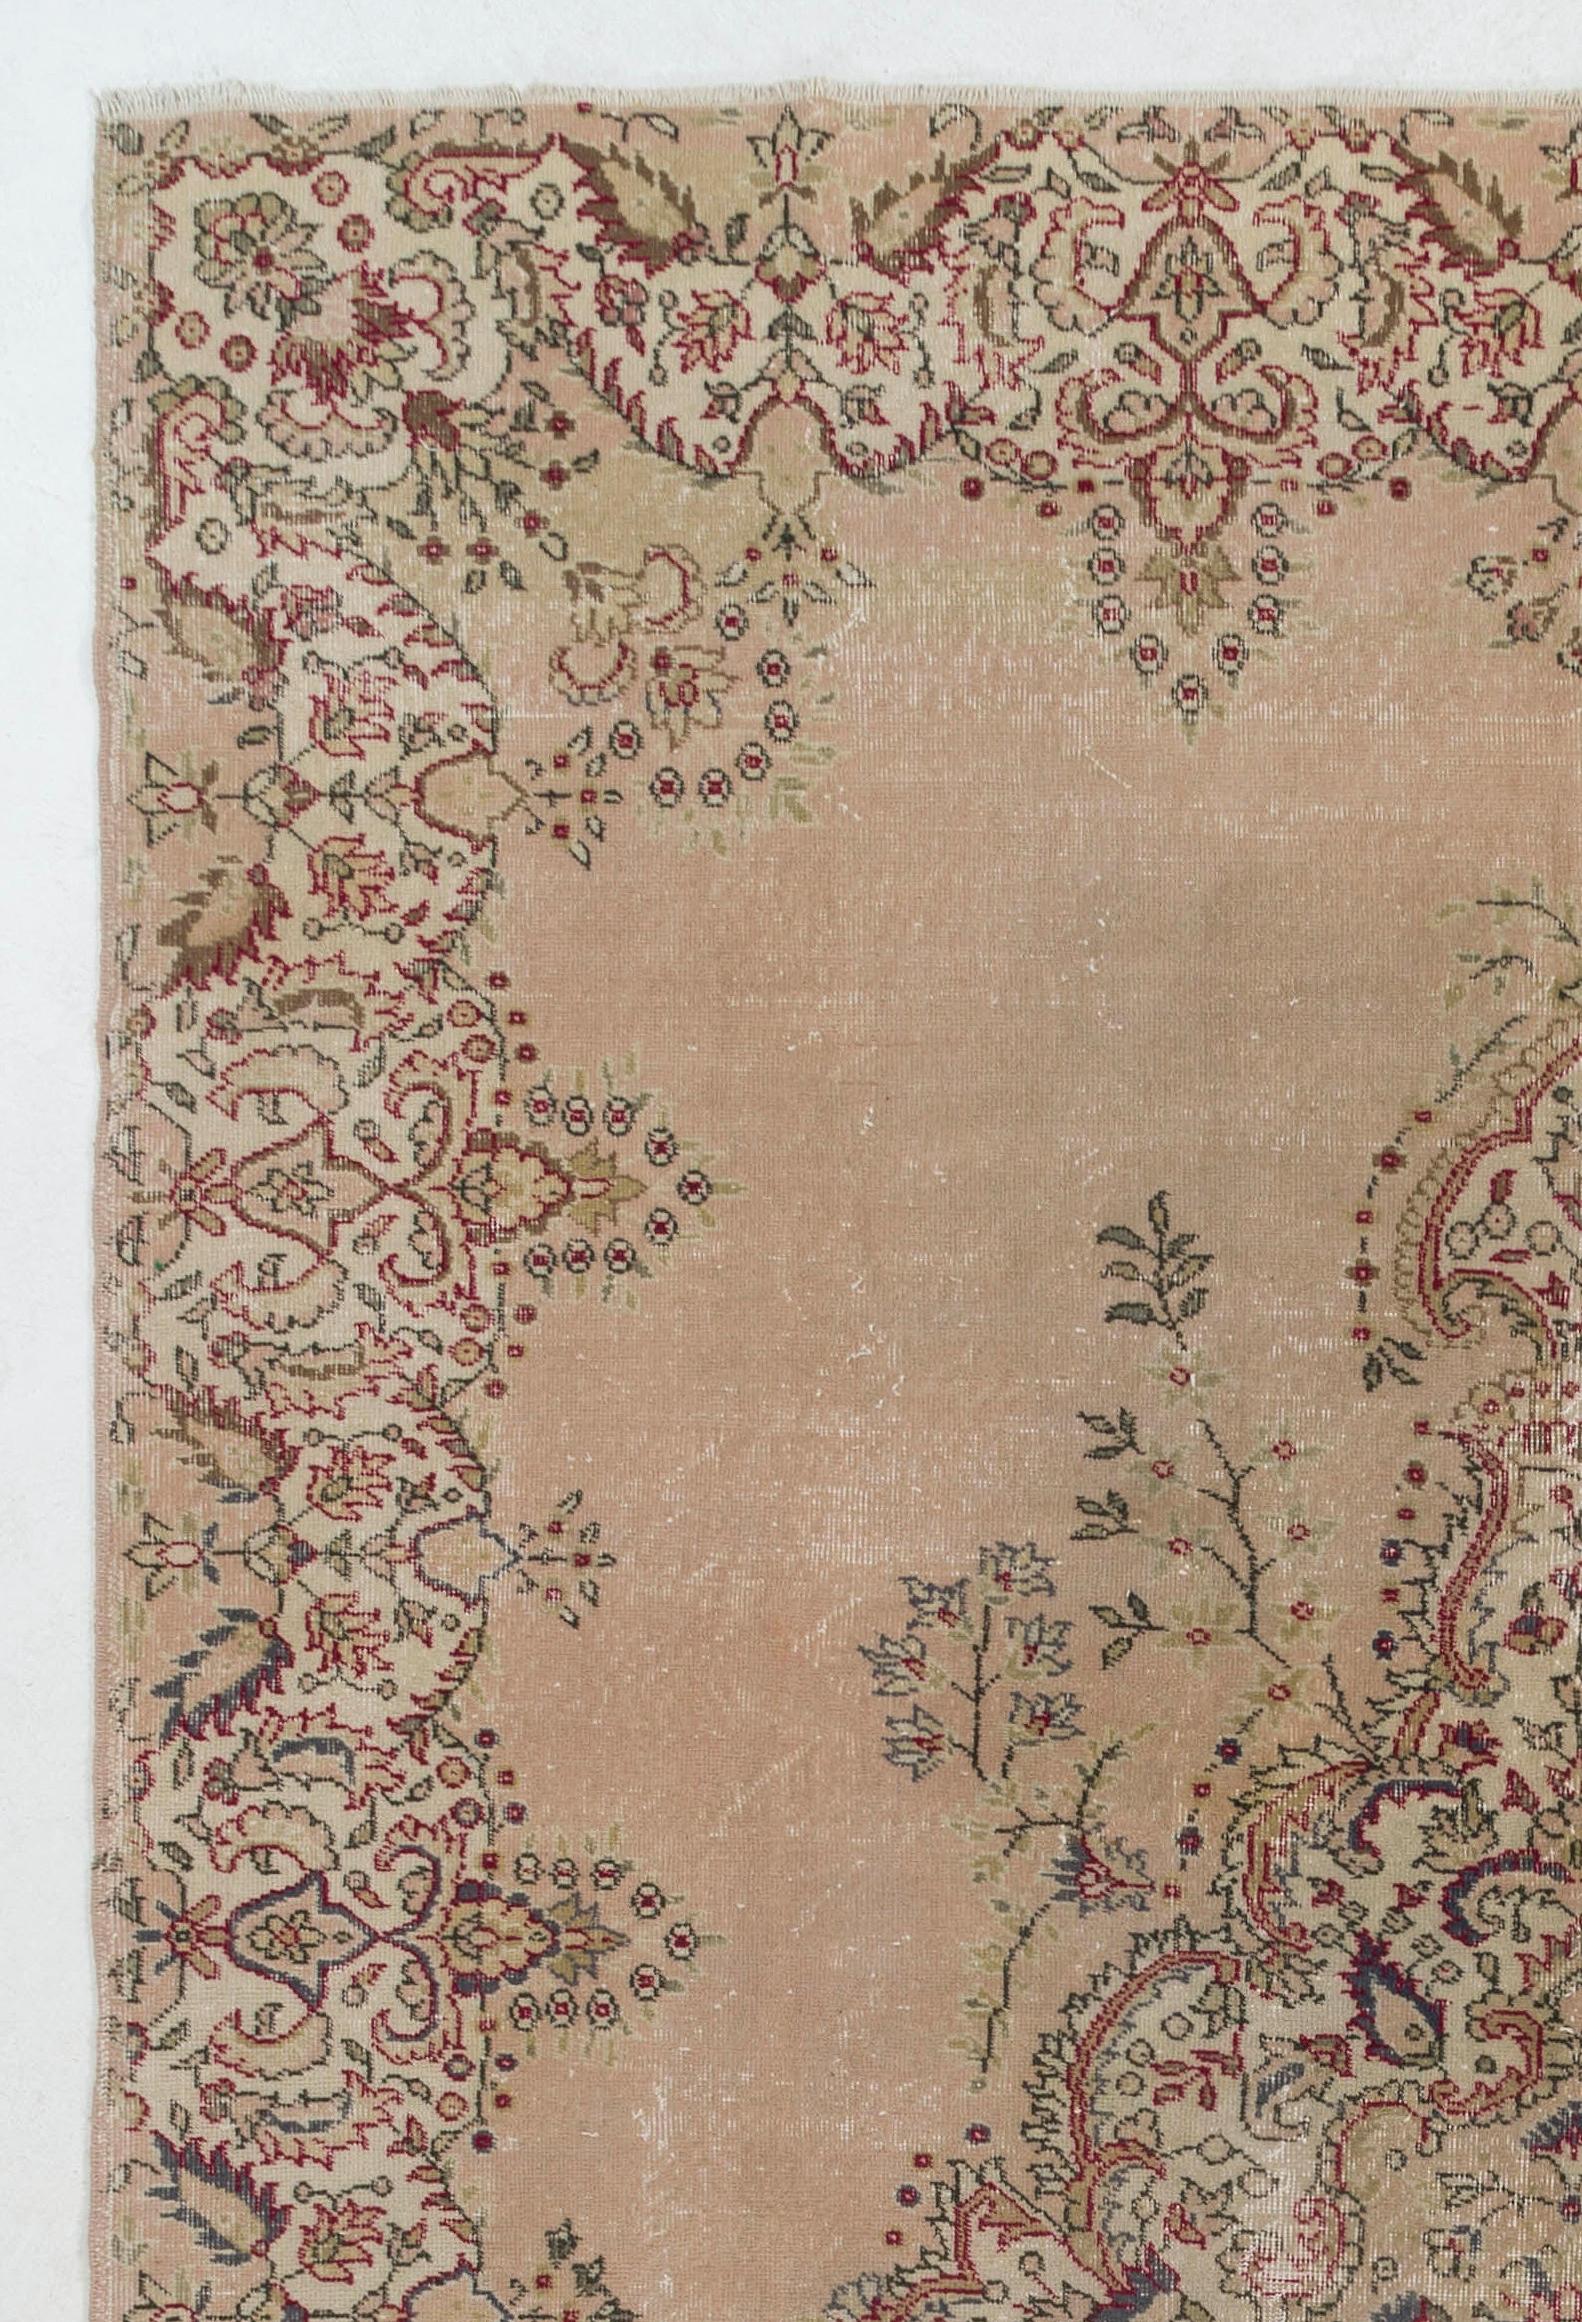 A finely hand knotted mid-20th century area rug from Western Central Turkey with a well-drawn garden design in a soft, pleasing color palette. The rug features an elegant curvilinear medallion filled with and surrounded by dainty floral vines